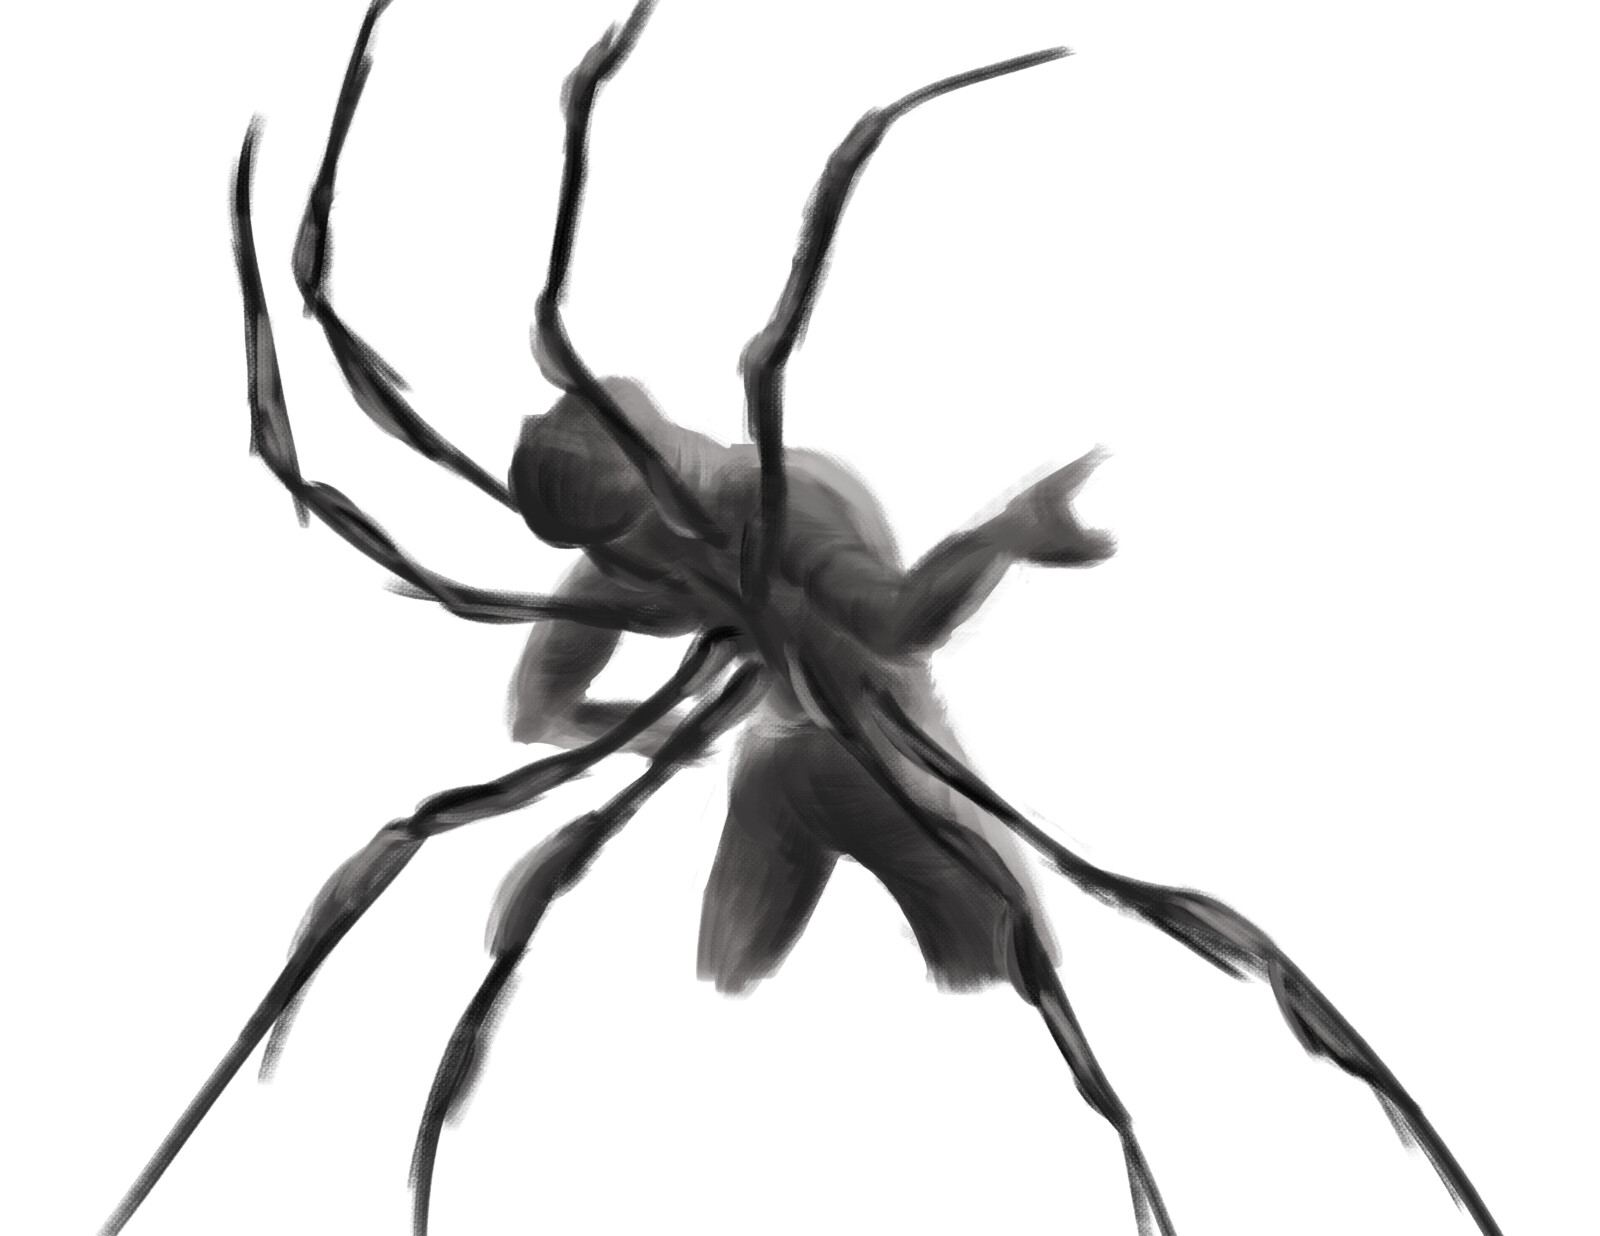 Conceptualizing Shadow's transformation into an arachnid and working on the physical placement of the spider legs. 